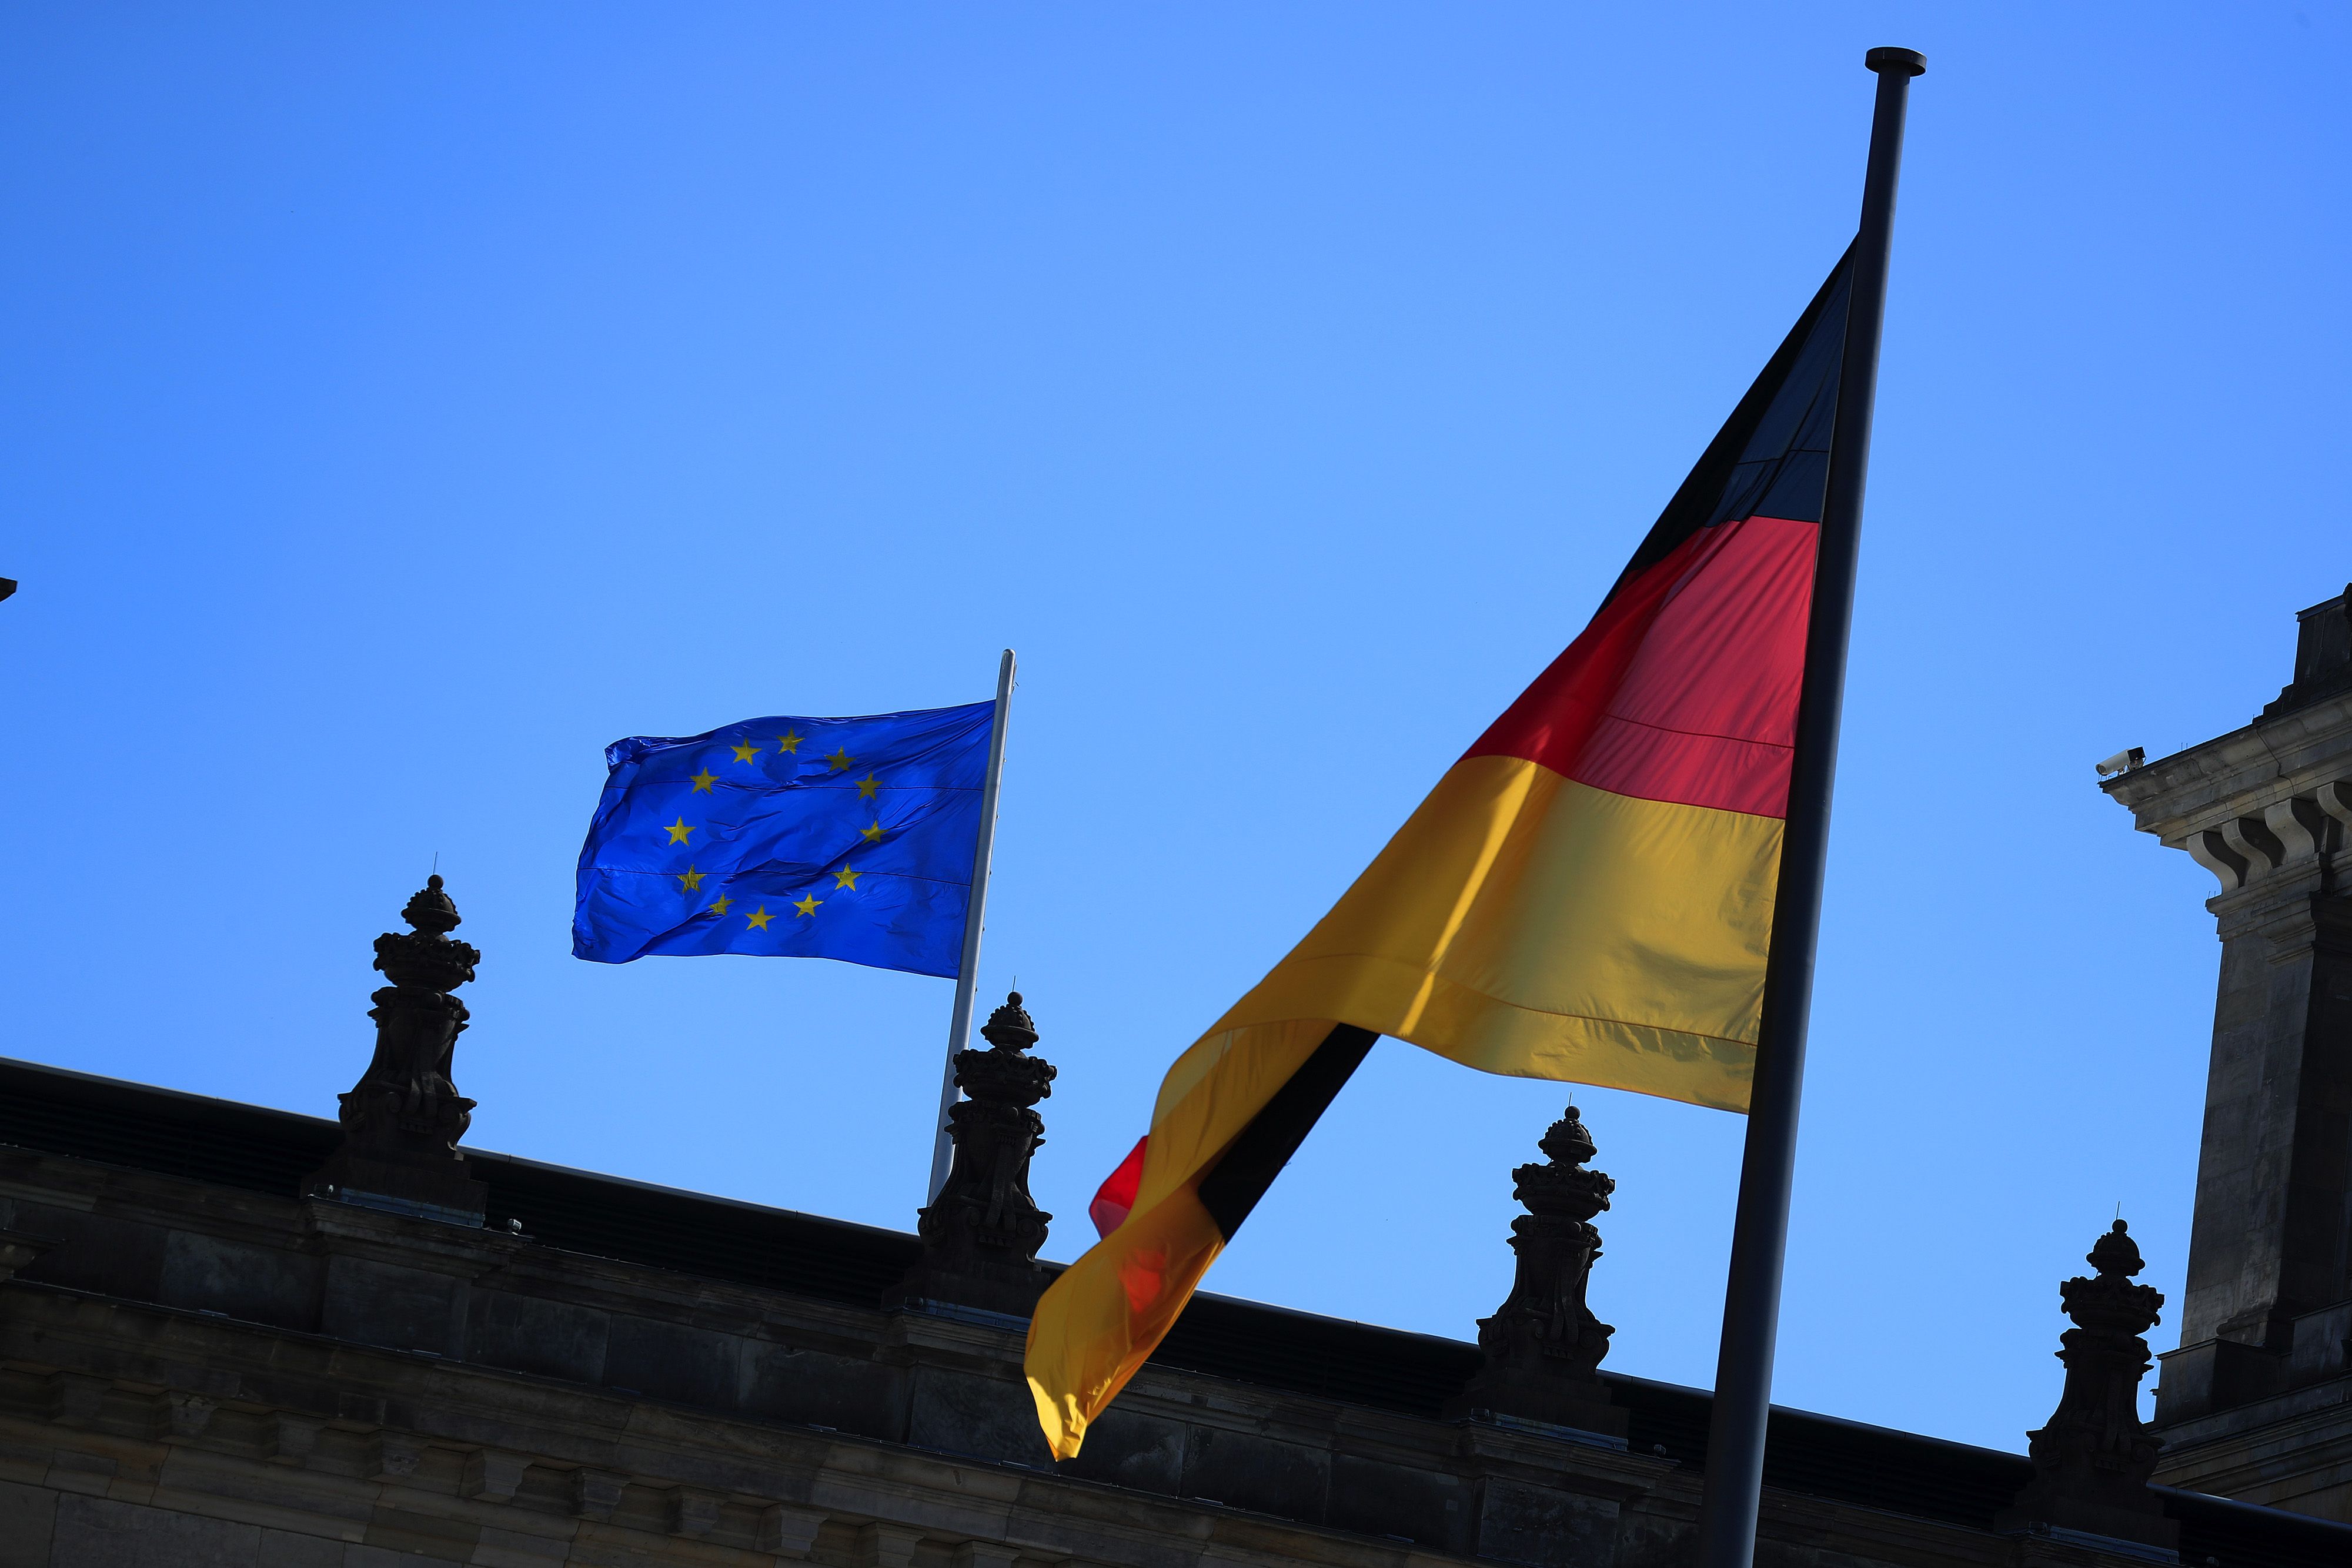 Germany backs carbon pricing in EU climate policy overhaul - document